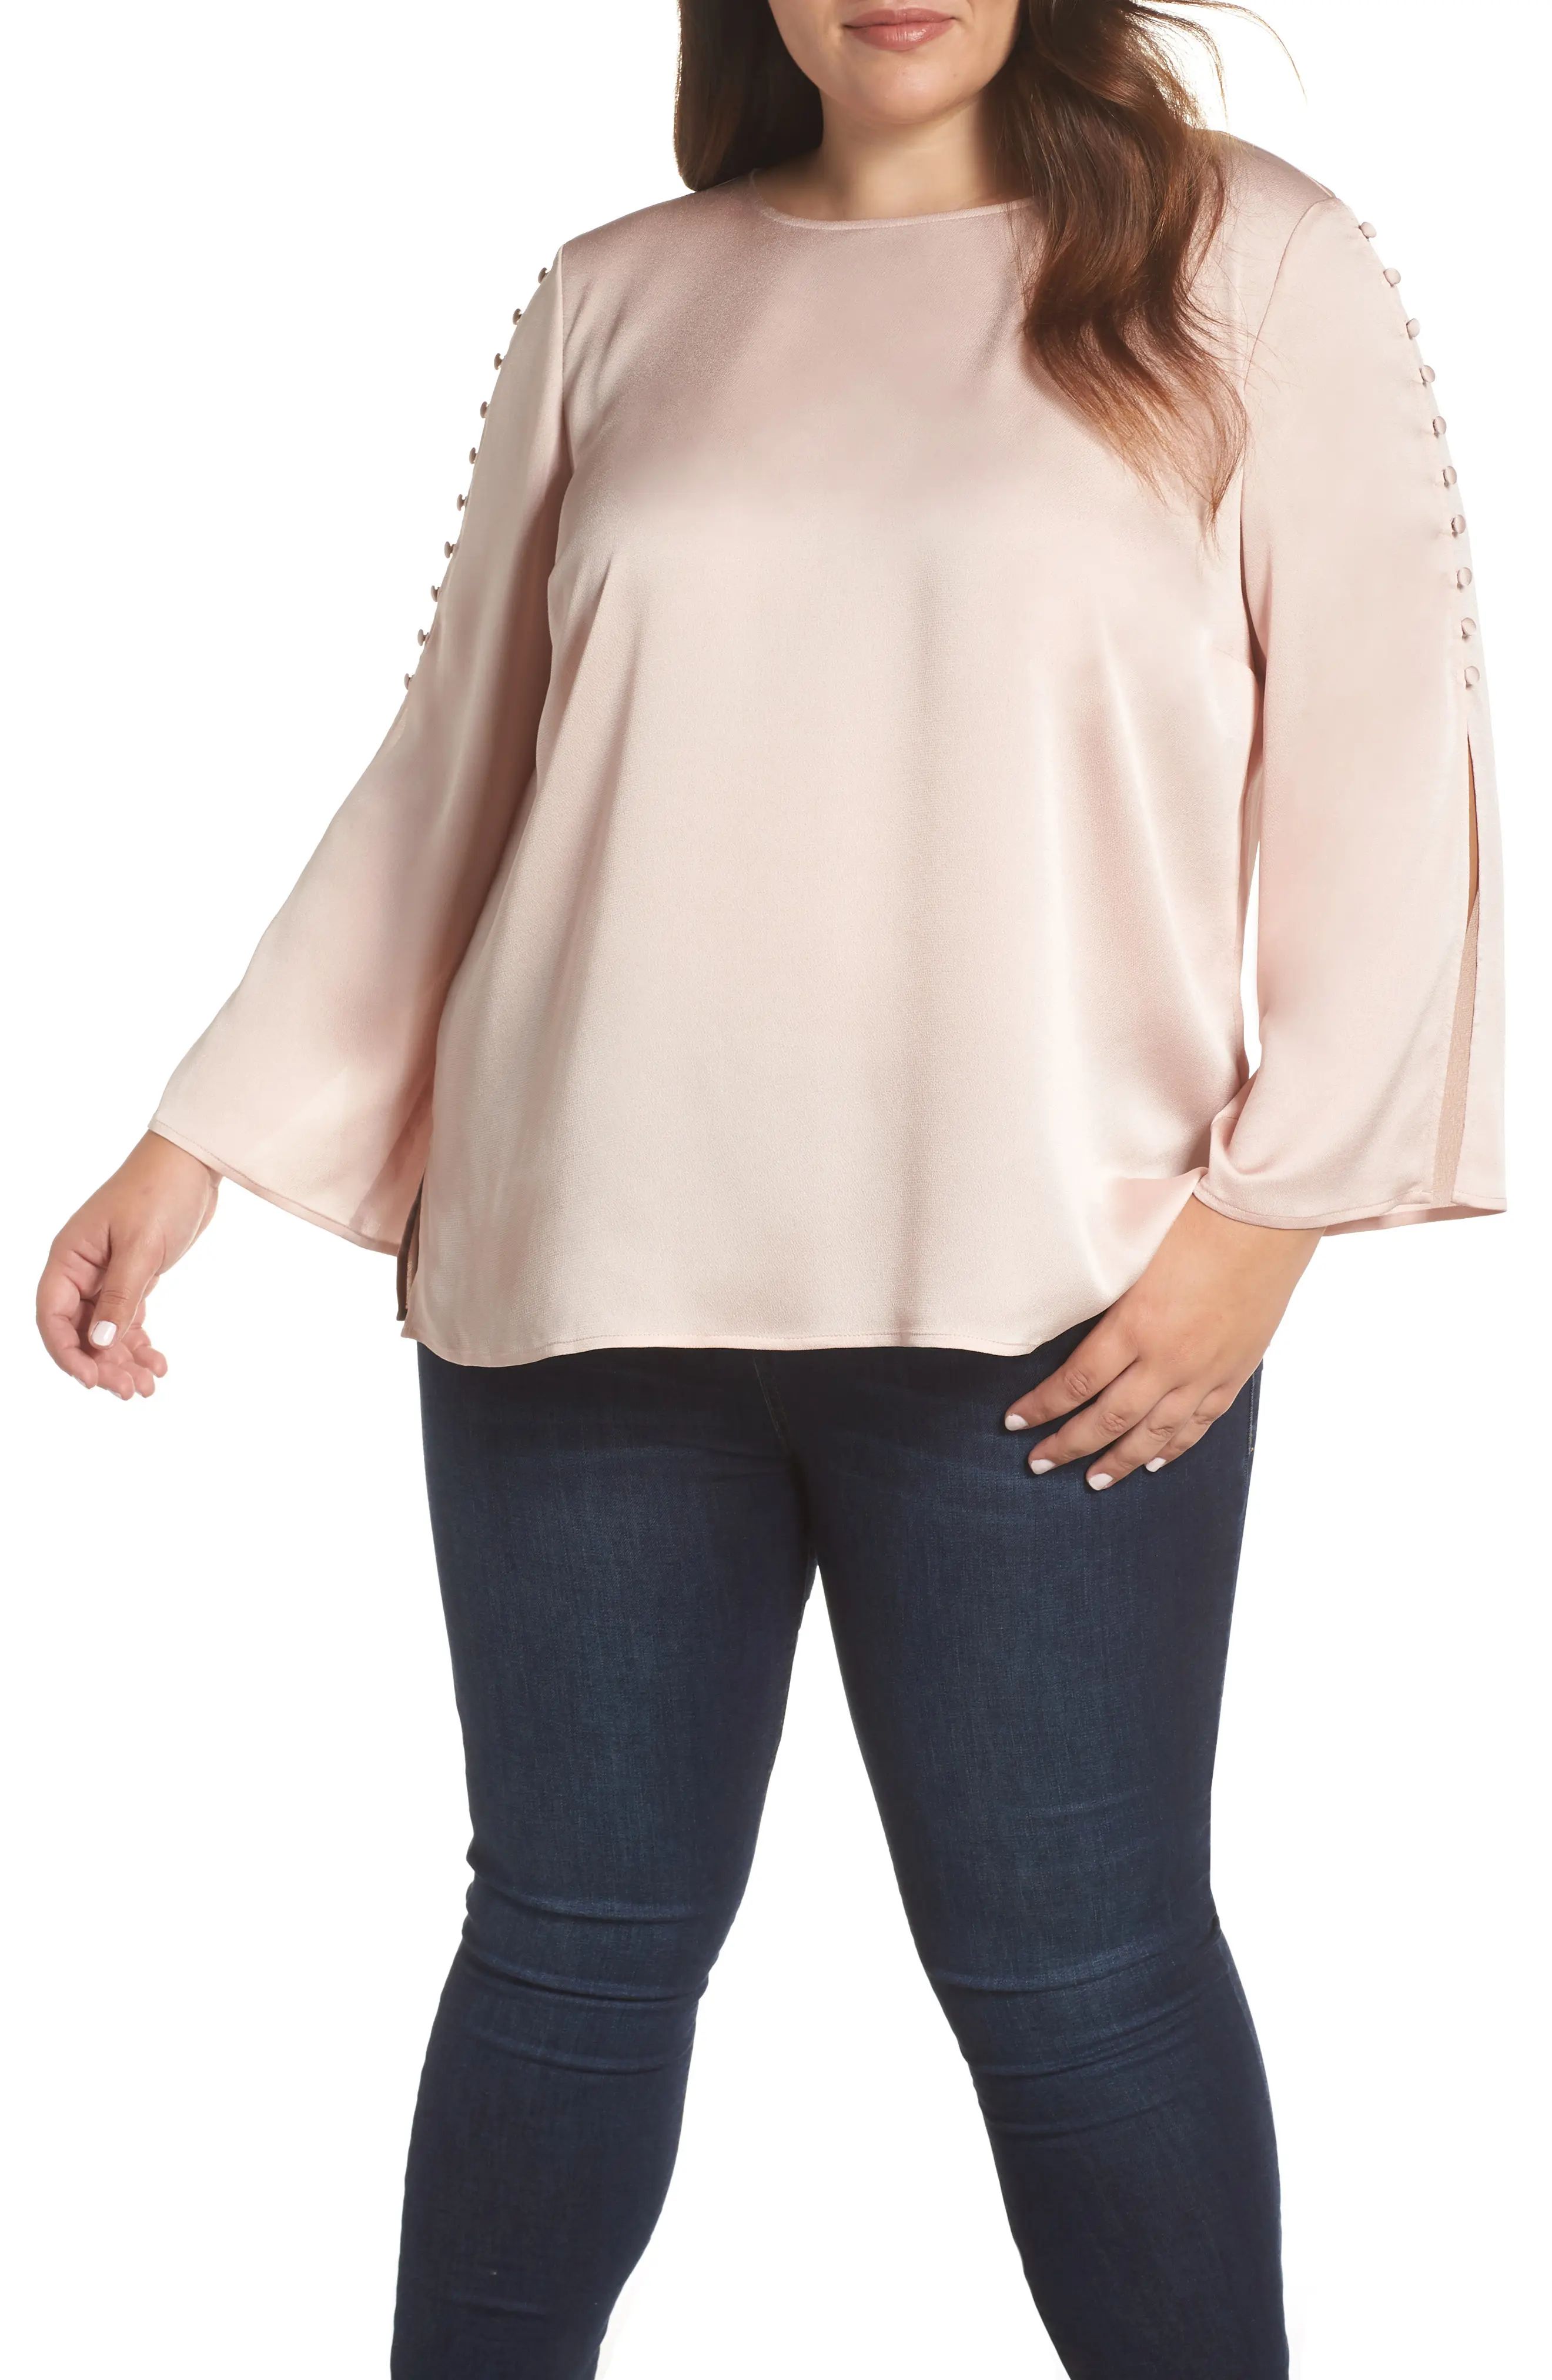 Plus Size Women's Vince Camuto Button Bell Sleeve Blouse, Size 1X - Pink | Nordstrom